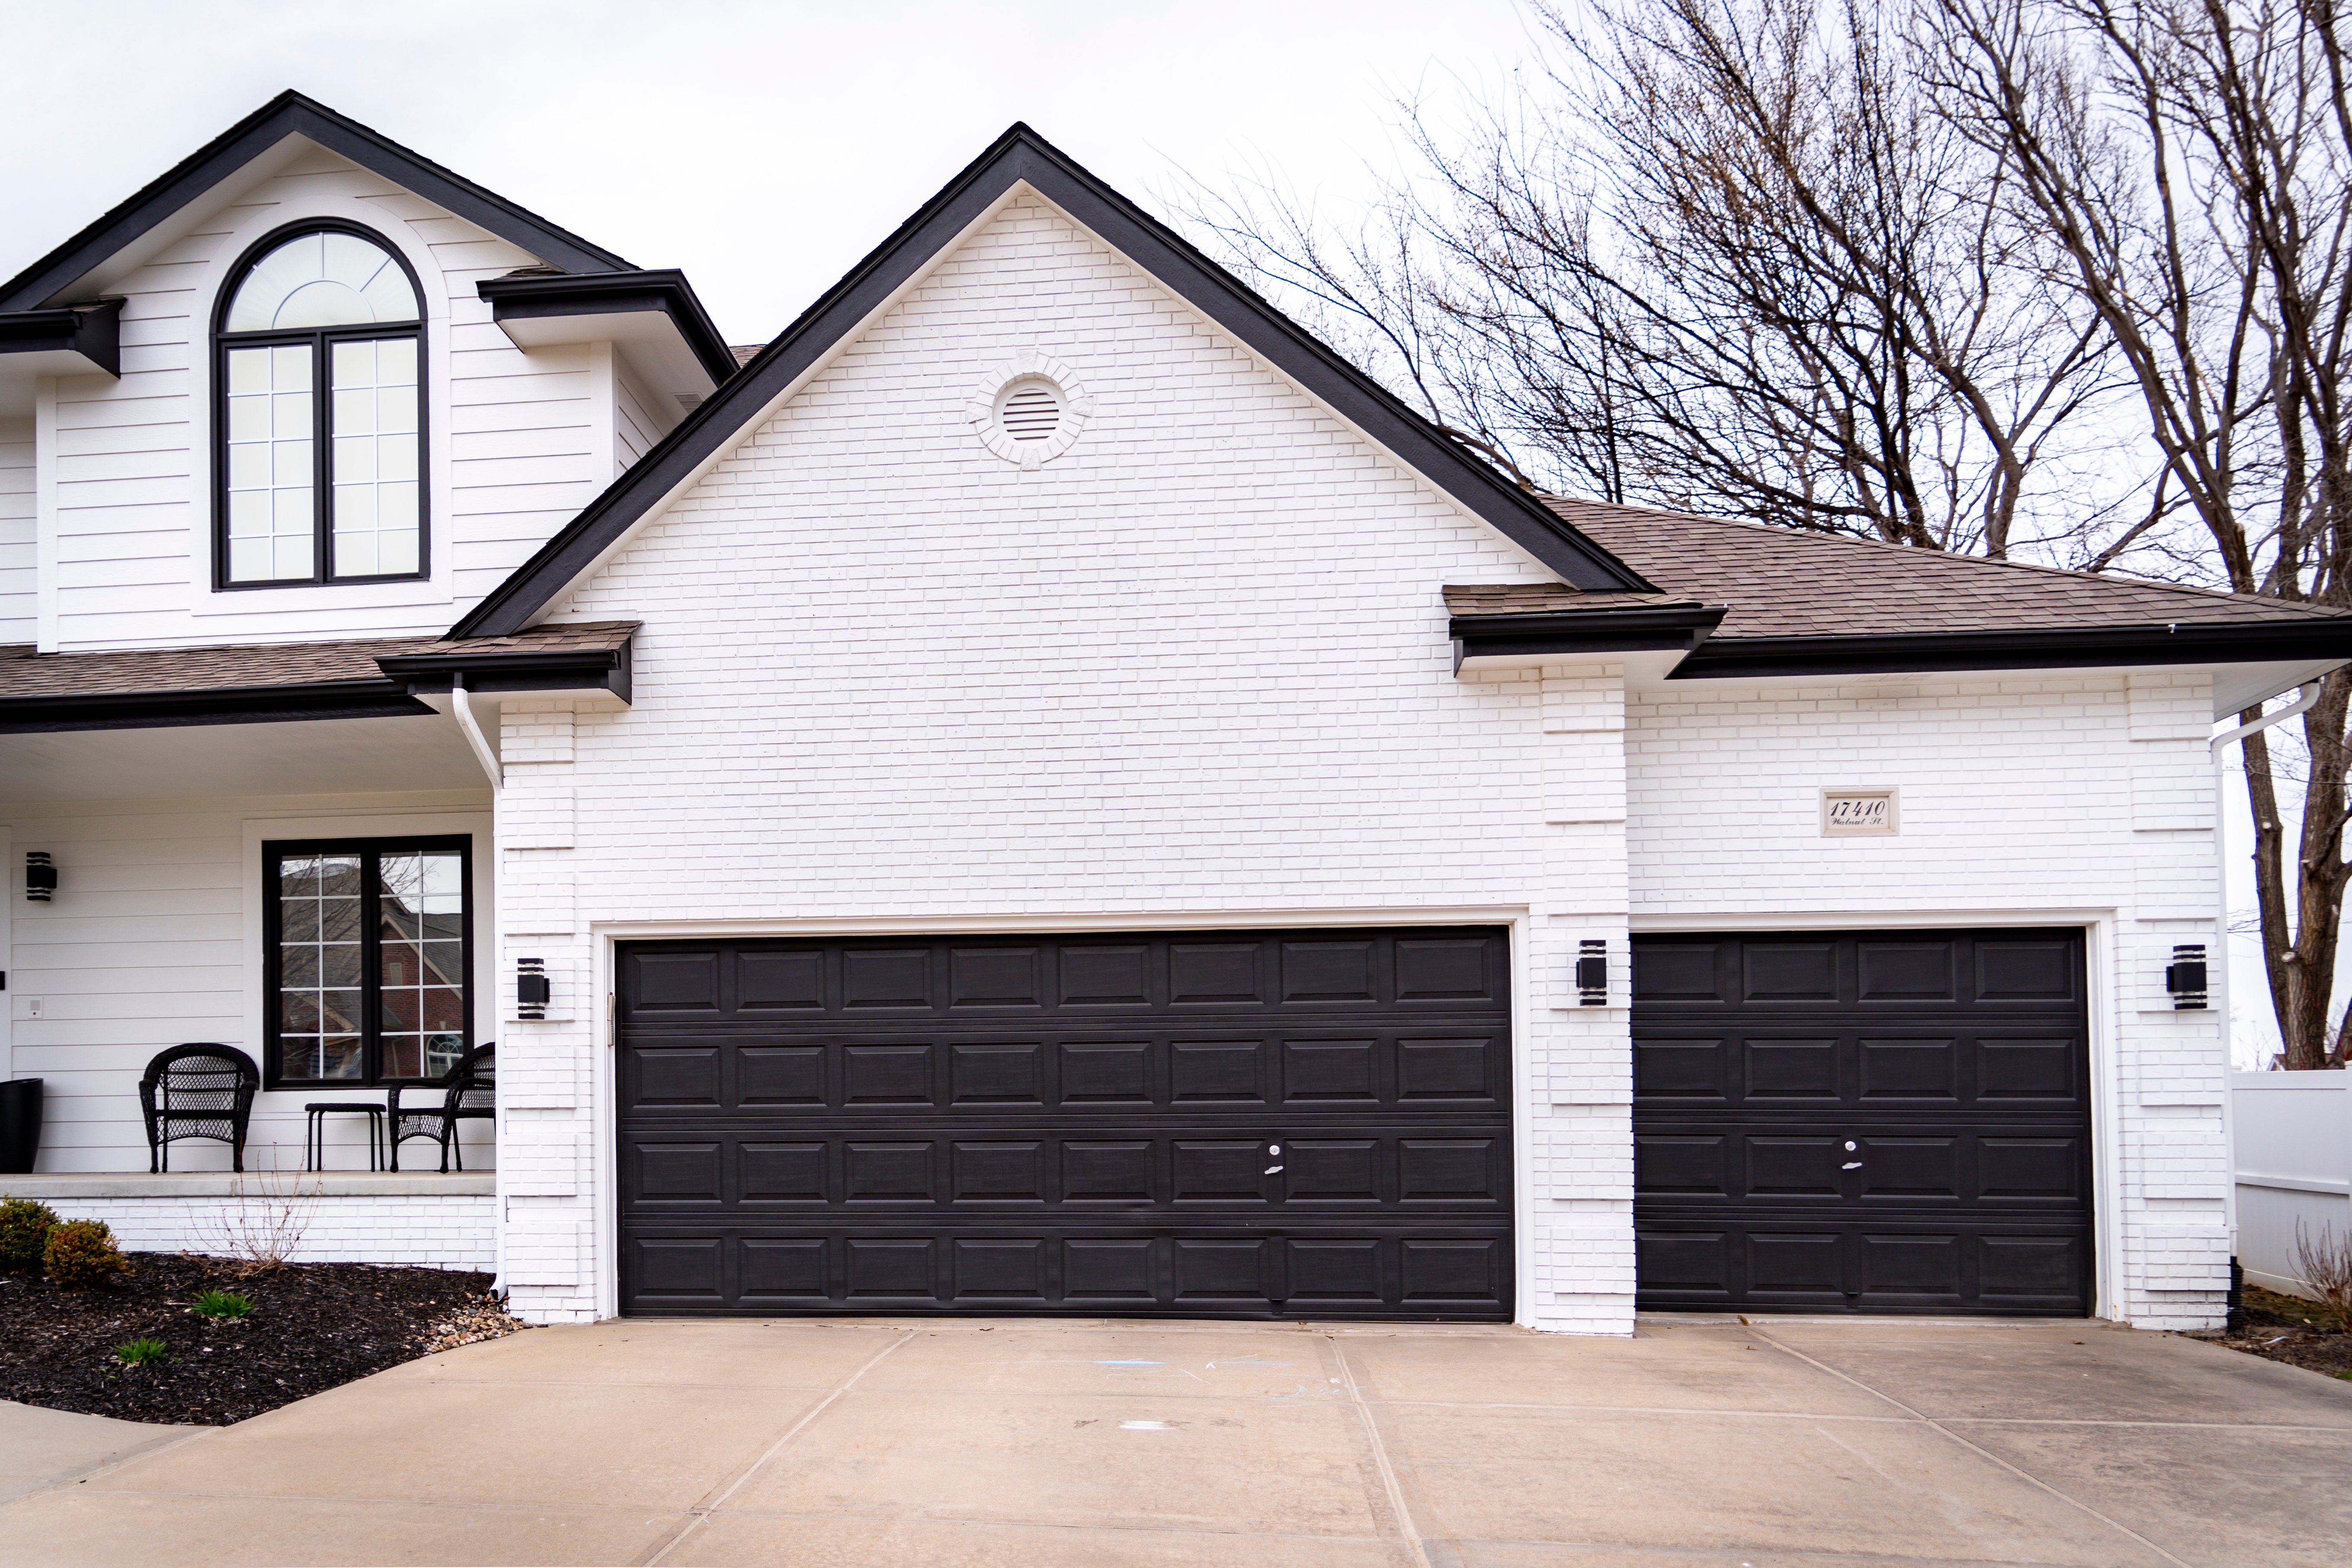 White exterior painted home with black trim and accents.